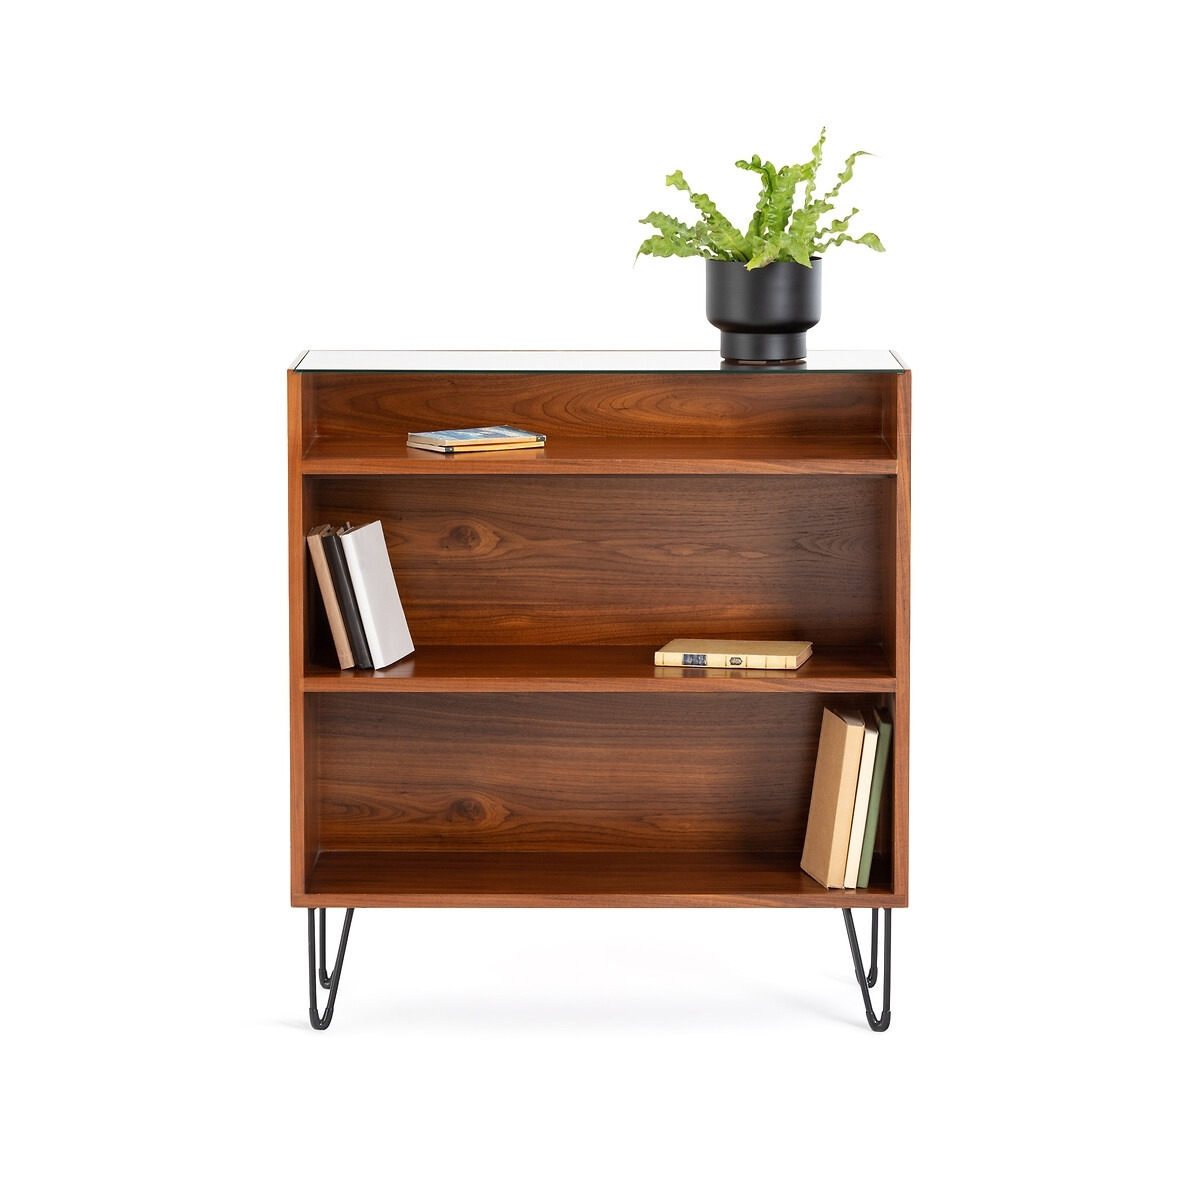 Watford Vintage Console Table with Shelving - image 1